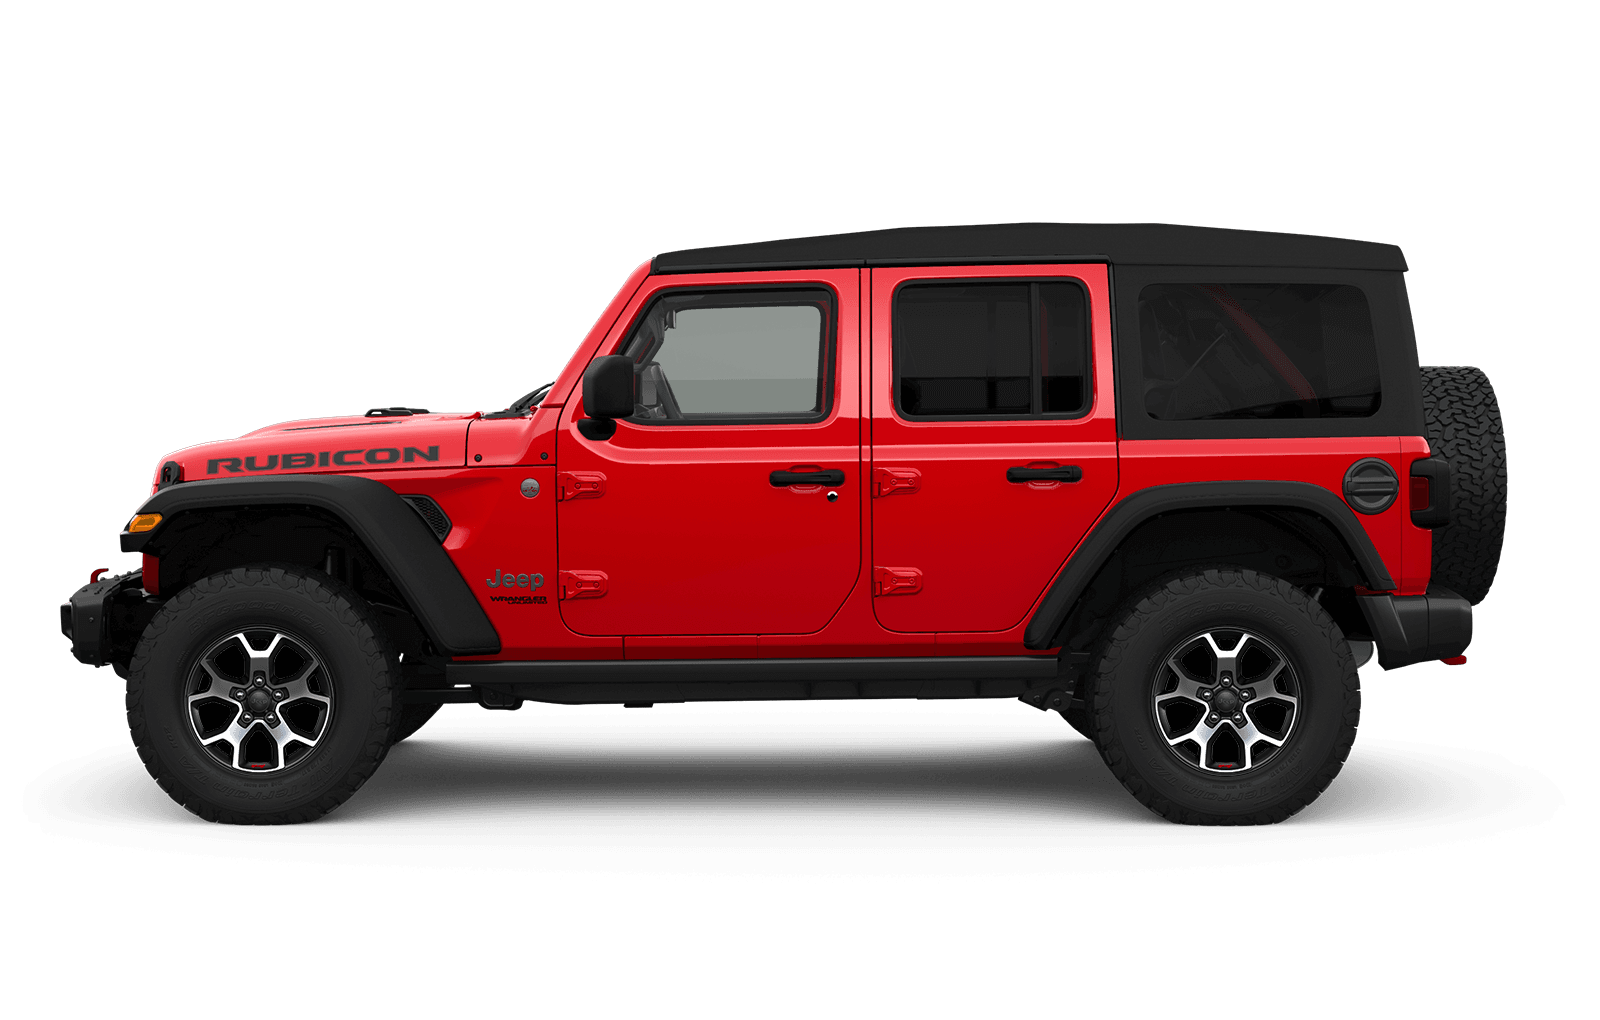 2019 Jeep Wrangler sideview with 17-inch aluminum wheel with black pockets